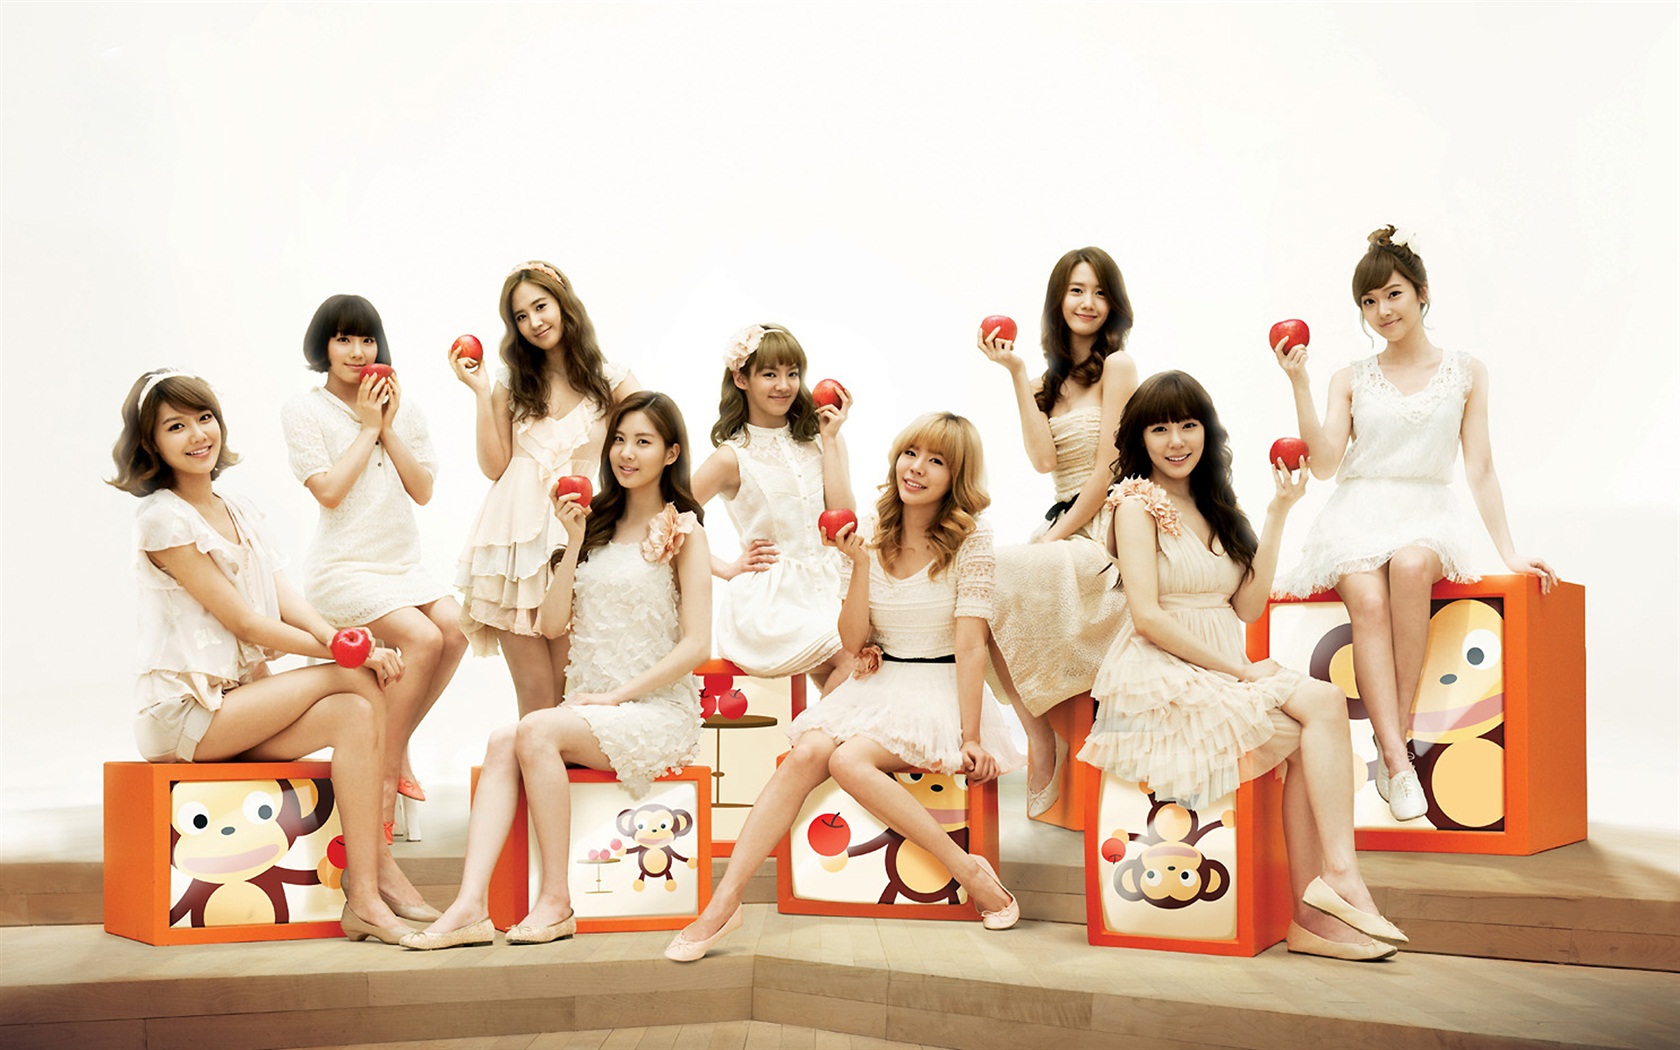 Girls Generation latest HD wallpapers collection #16 - 1680x1050